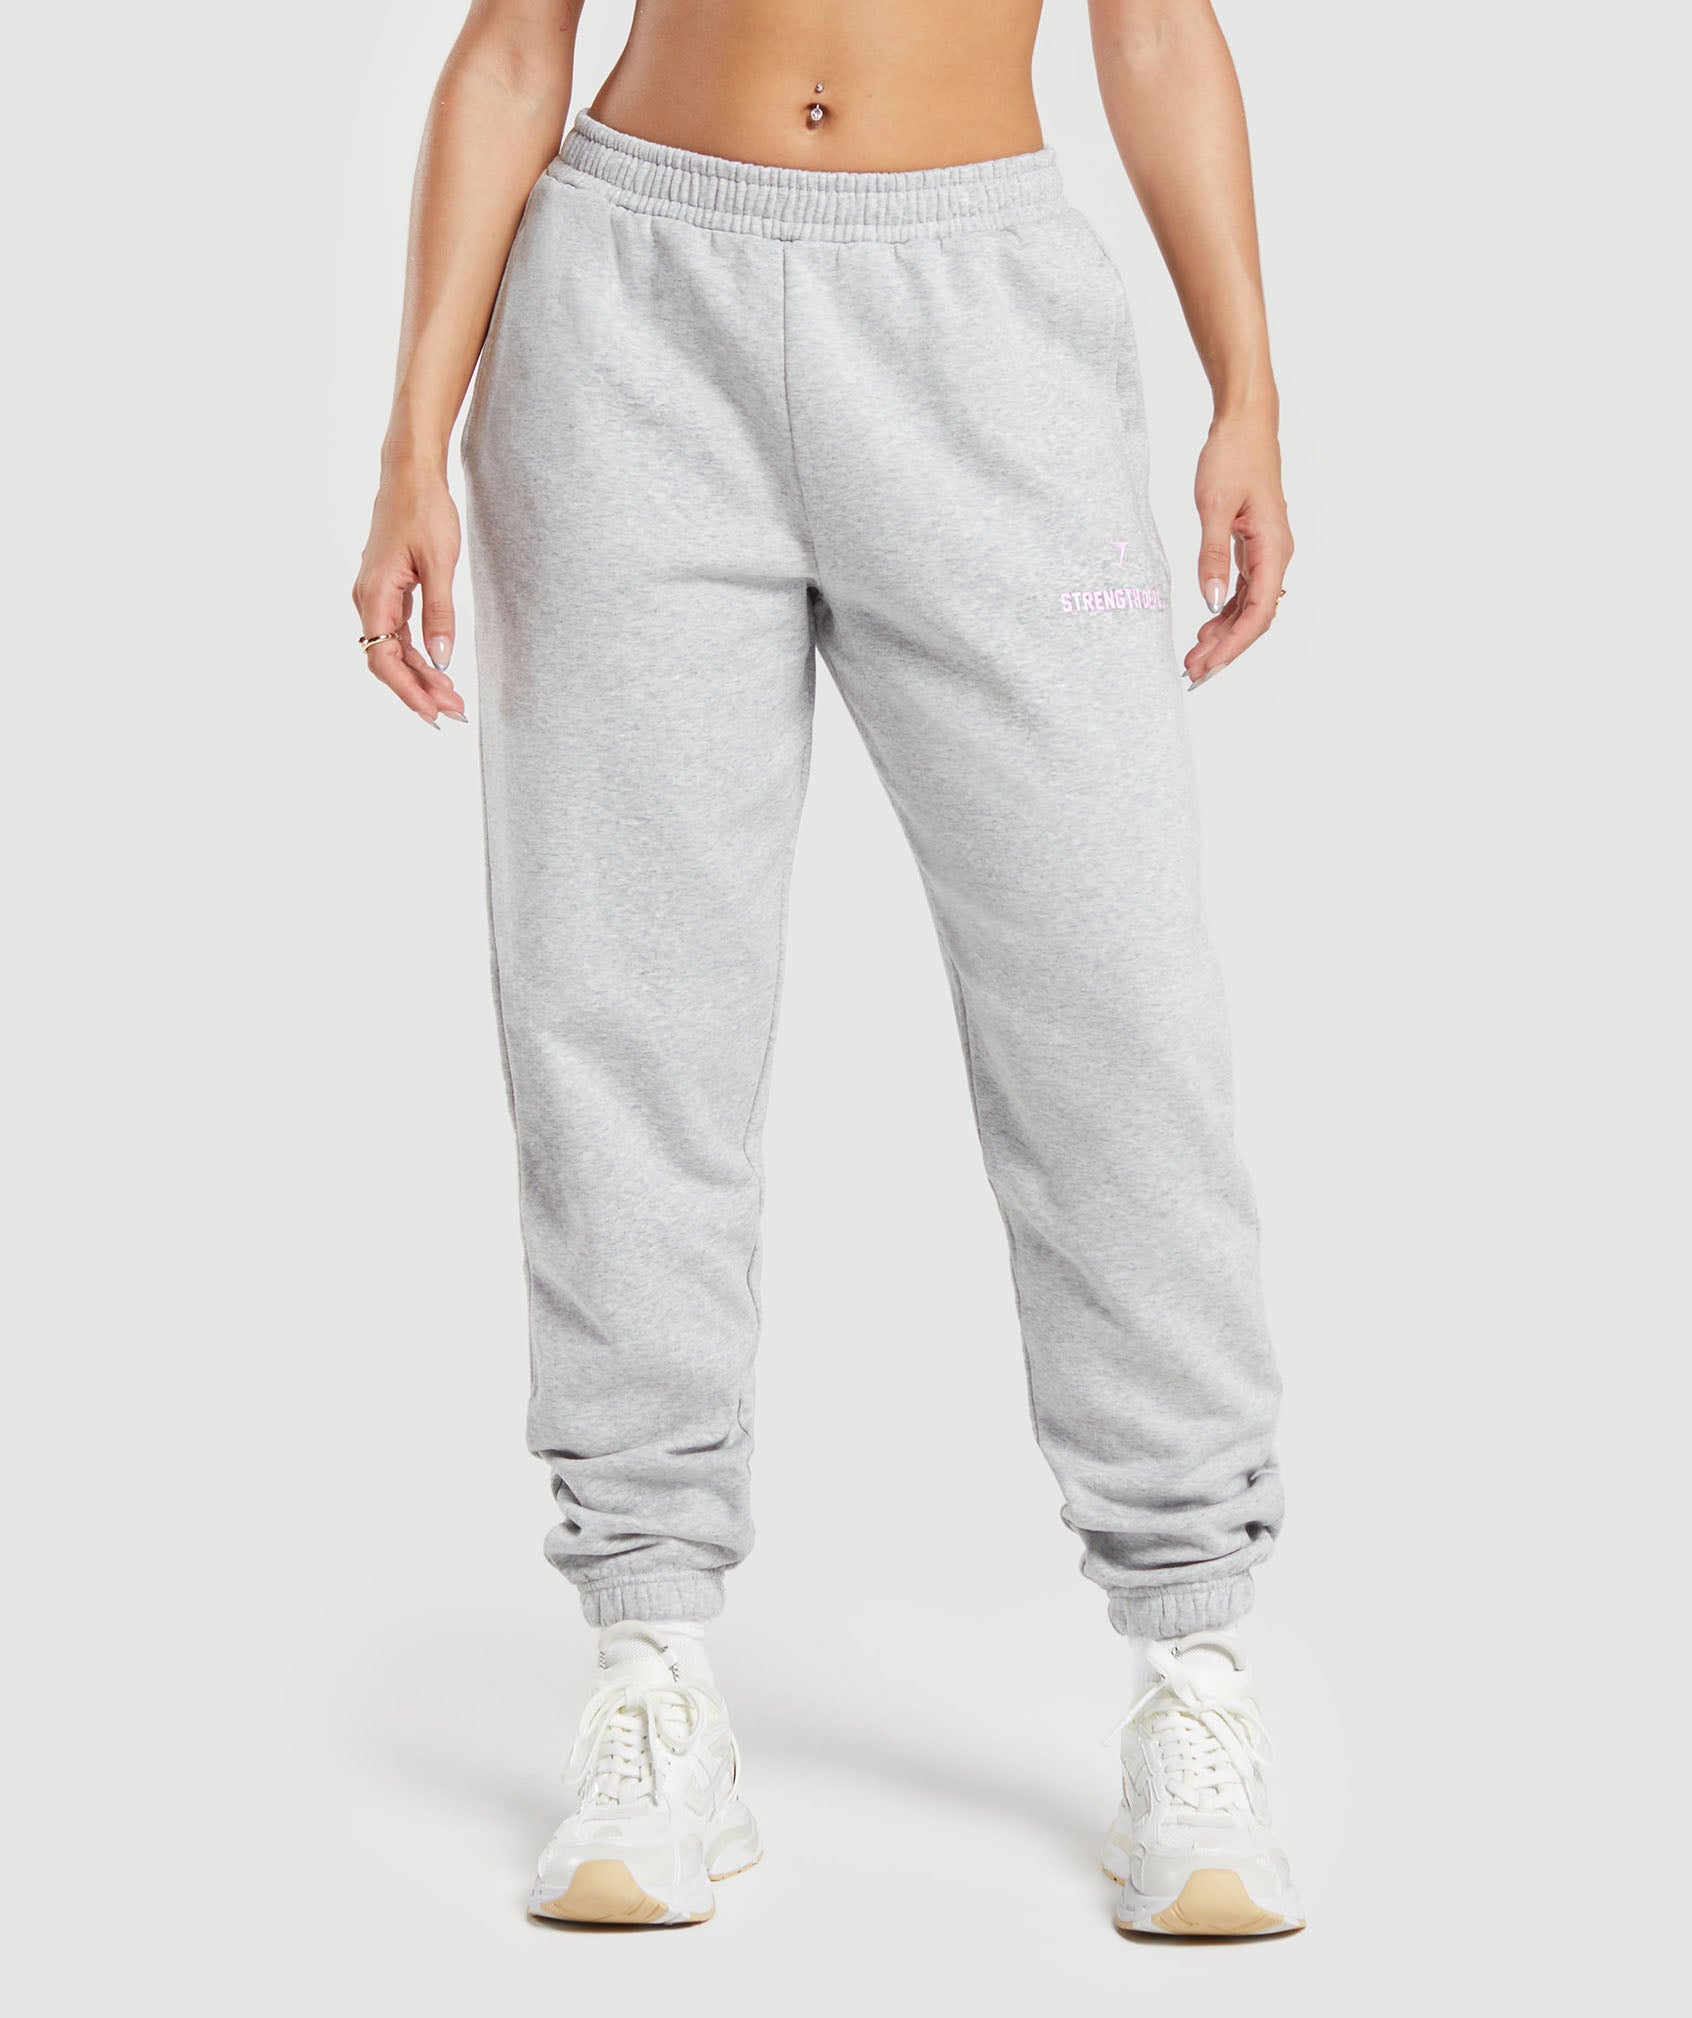 Gymshark Strength Department Graphic Joggers - Light Grey Core Marl